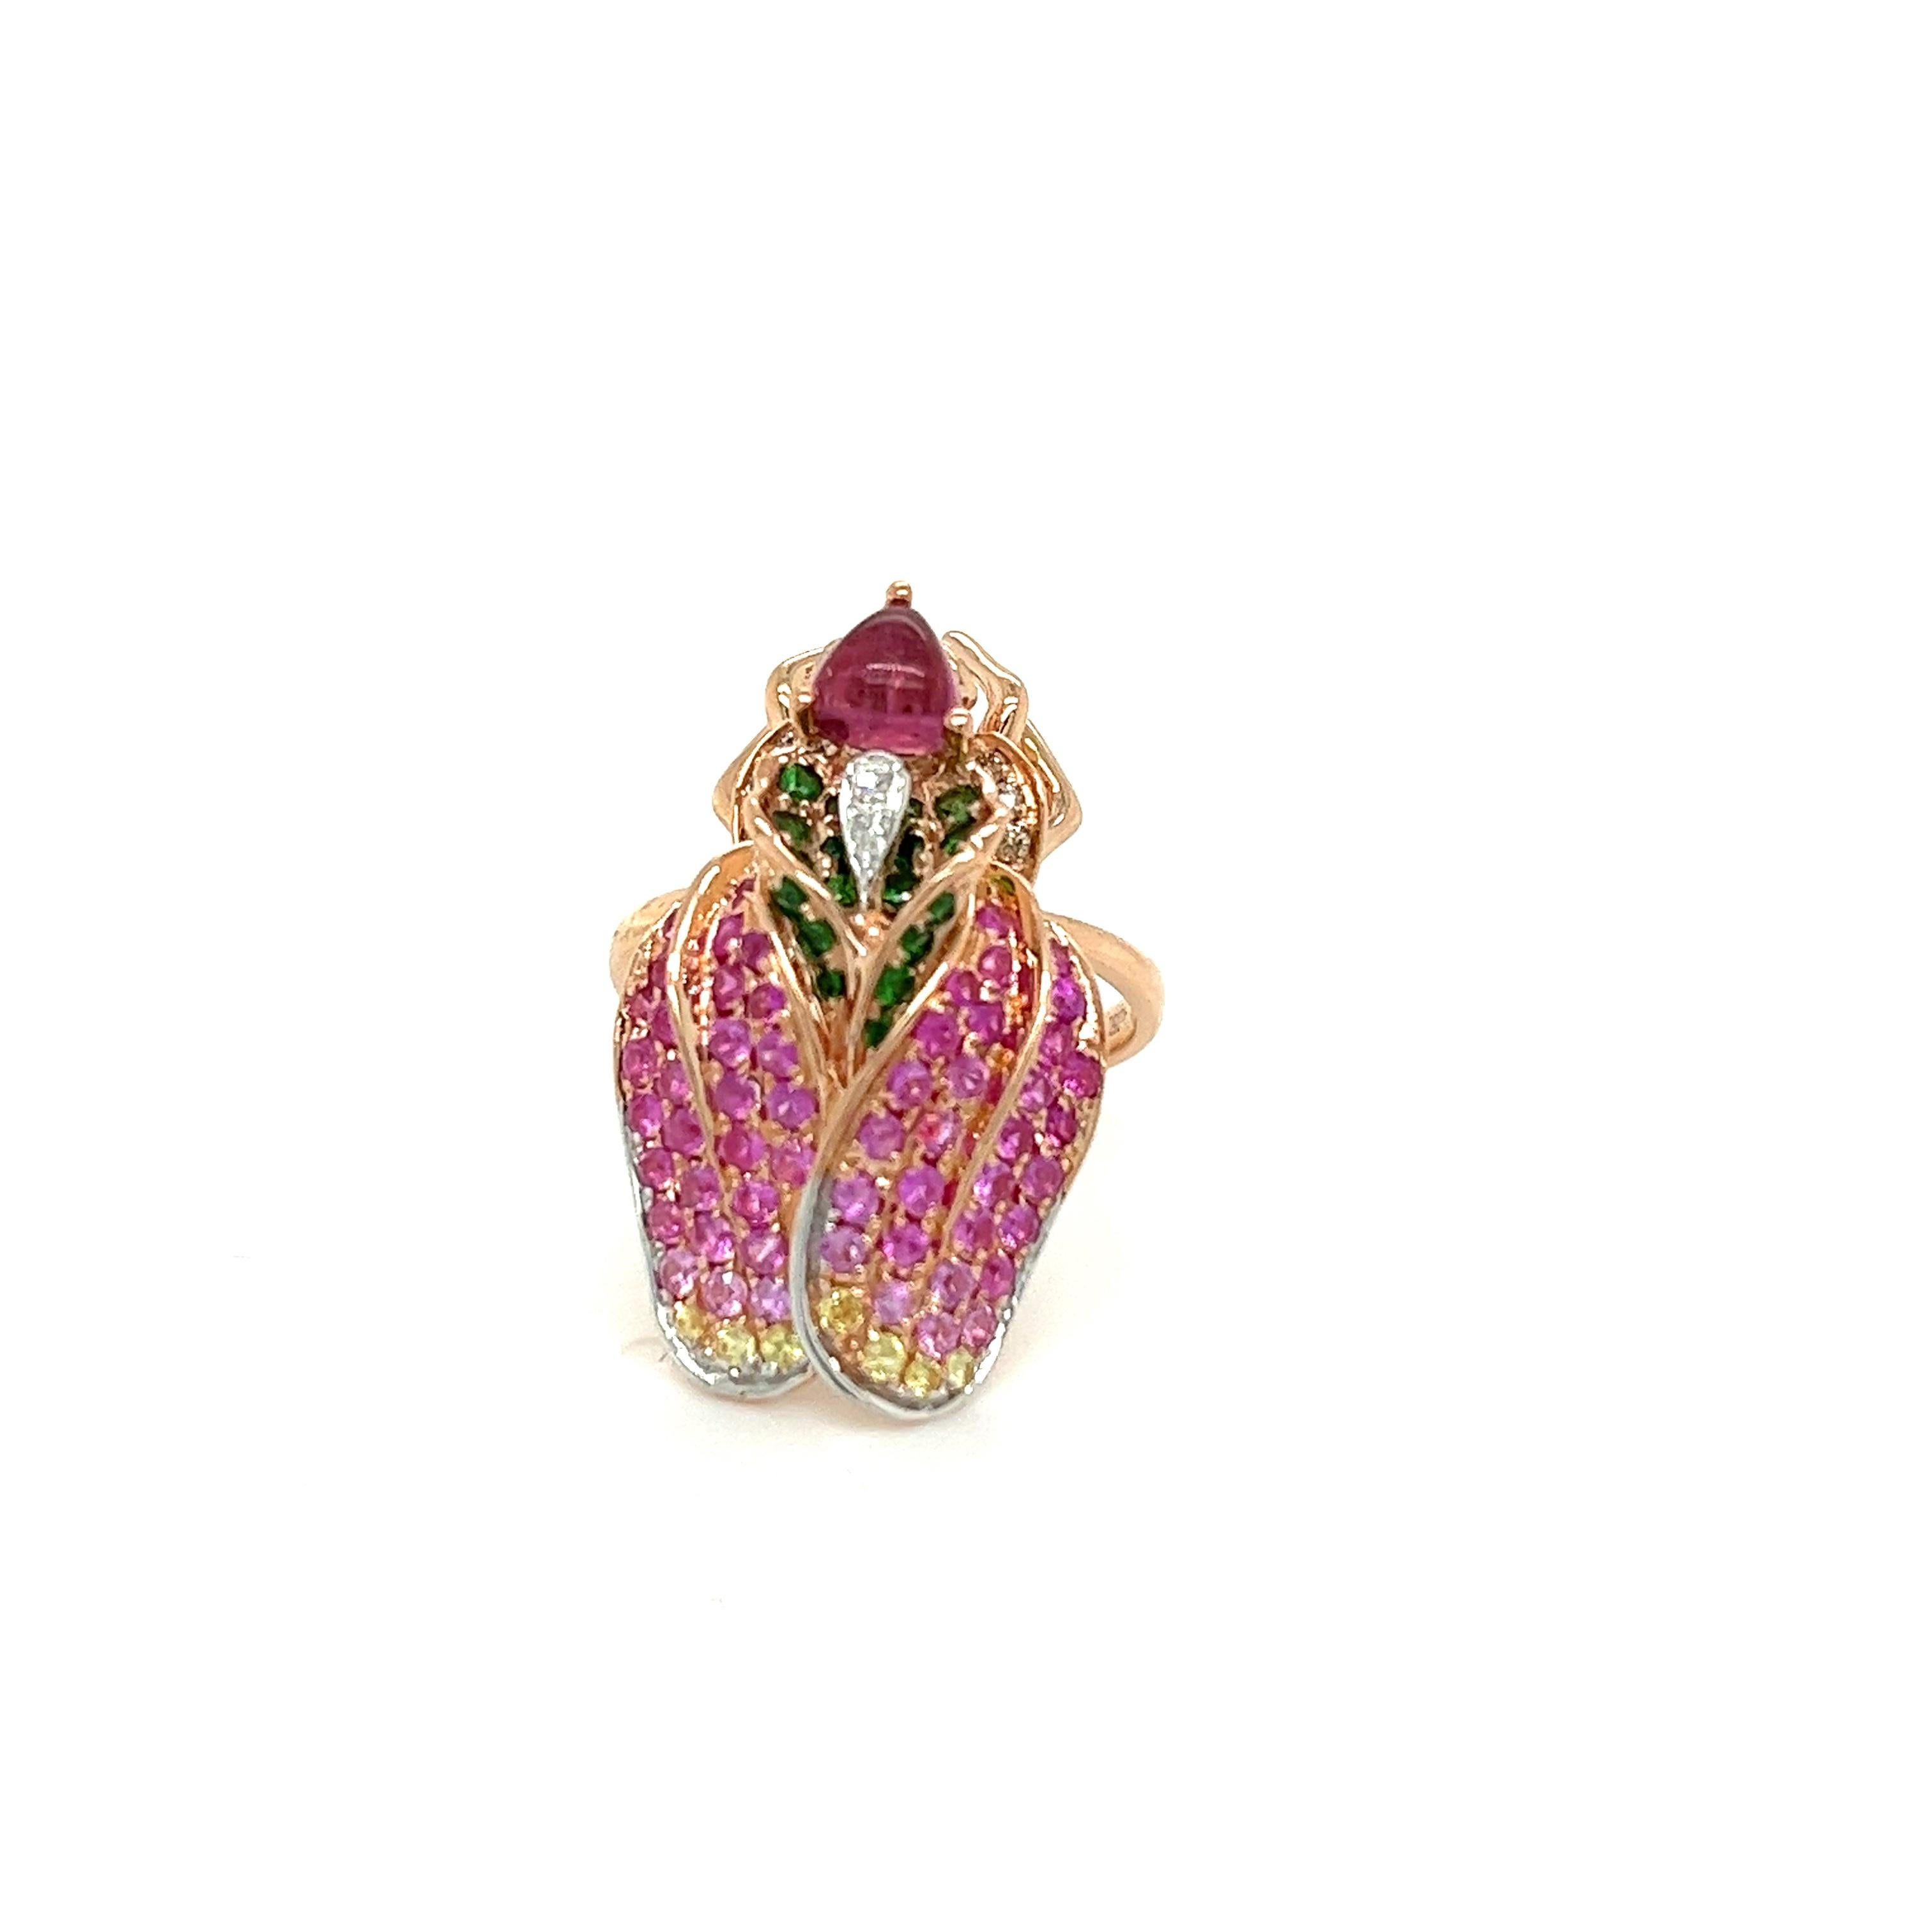 18K White Gold Fly Shaped Pink Sapphire & Tourmaline & Diamond Ring

8 RDBD 0.07 CT
4 RDDI 0.03 CT
19 RDGG 0.20 CT
57 RDPS 0.83 CT
1 MXTM 0.52 CT
7 RDYS 0.09 CT
18KR 7.20 GM
US 6.0

Pretty in pink, we cannot get enough of shimmering pearly pale or